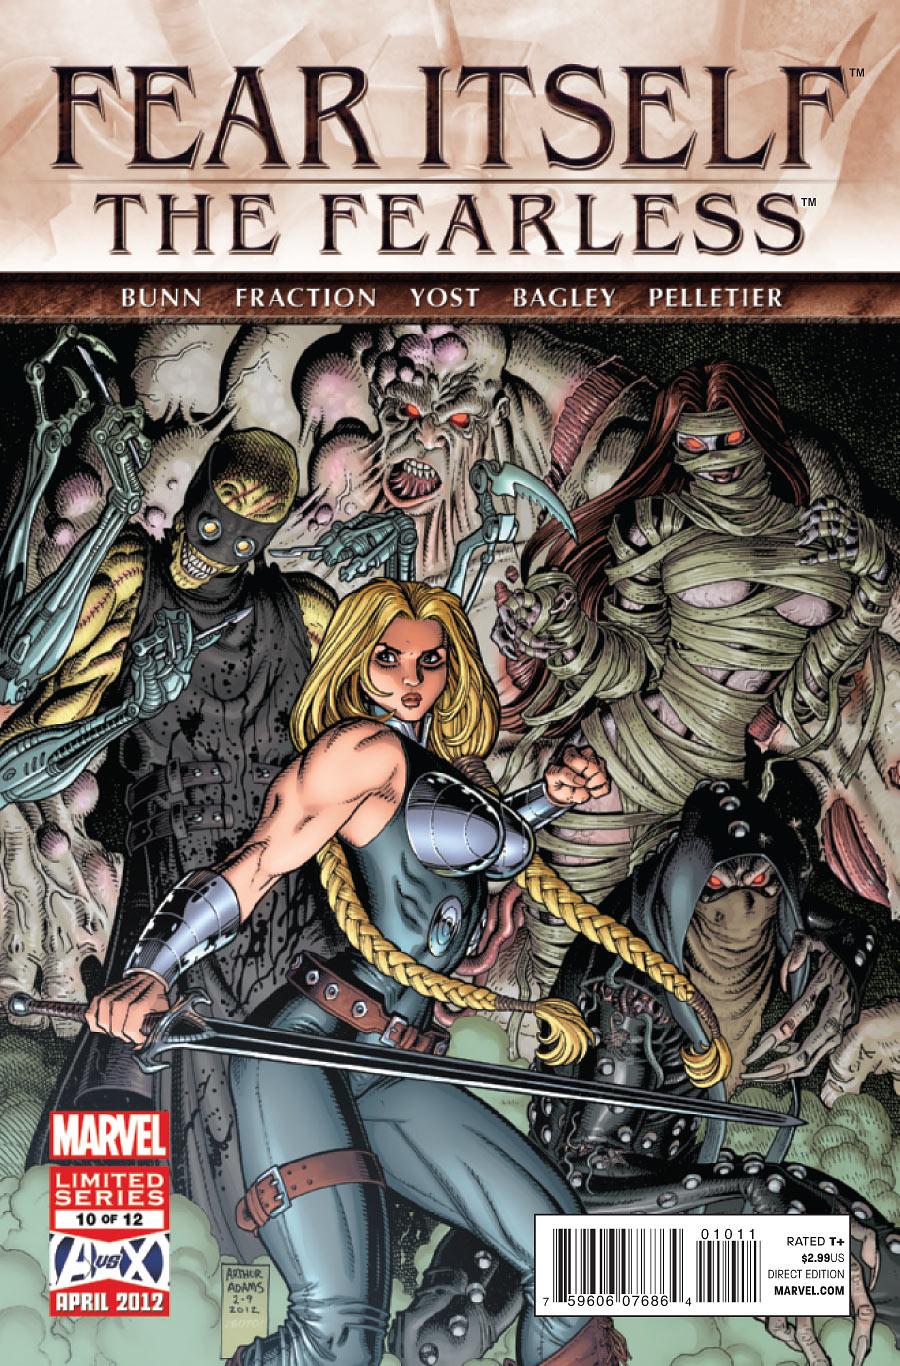 Fear Itself: The Fearless Vol. 1 #10